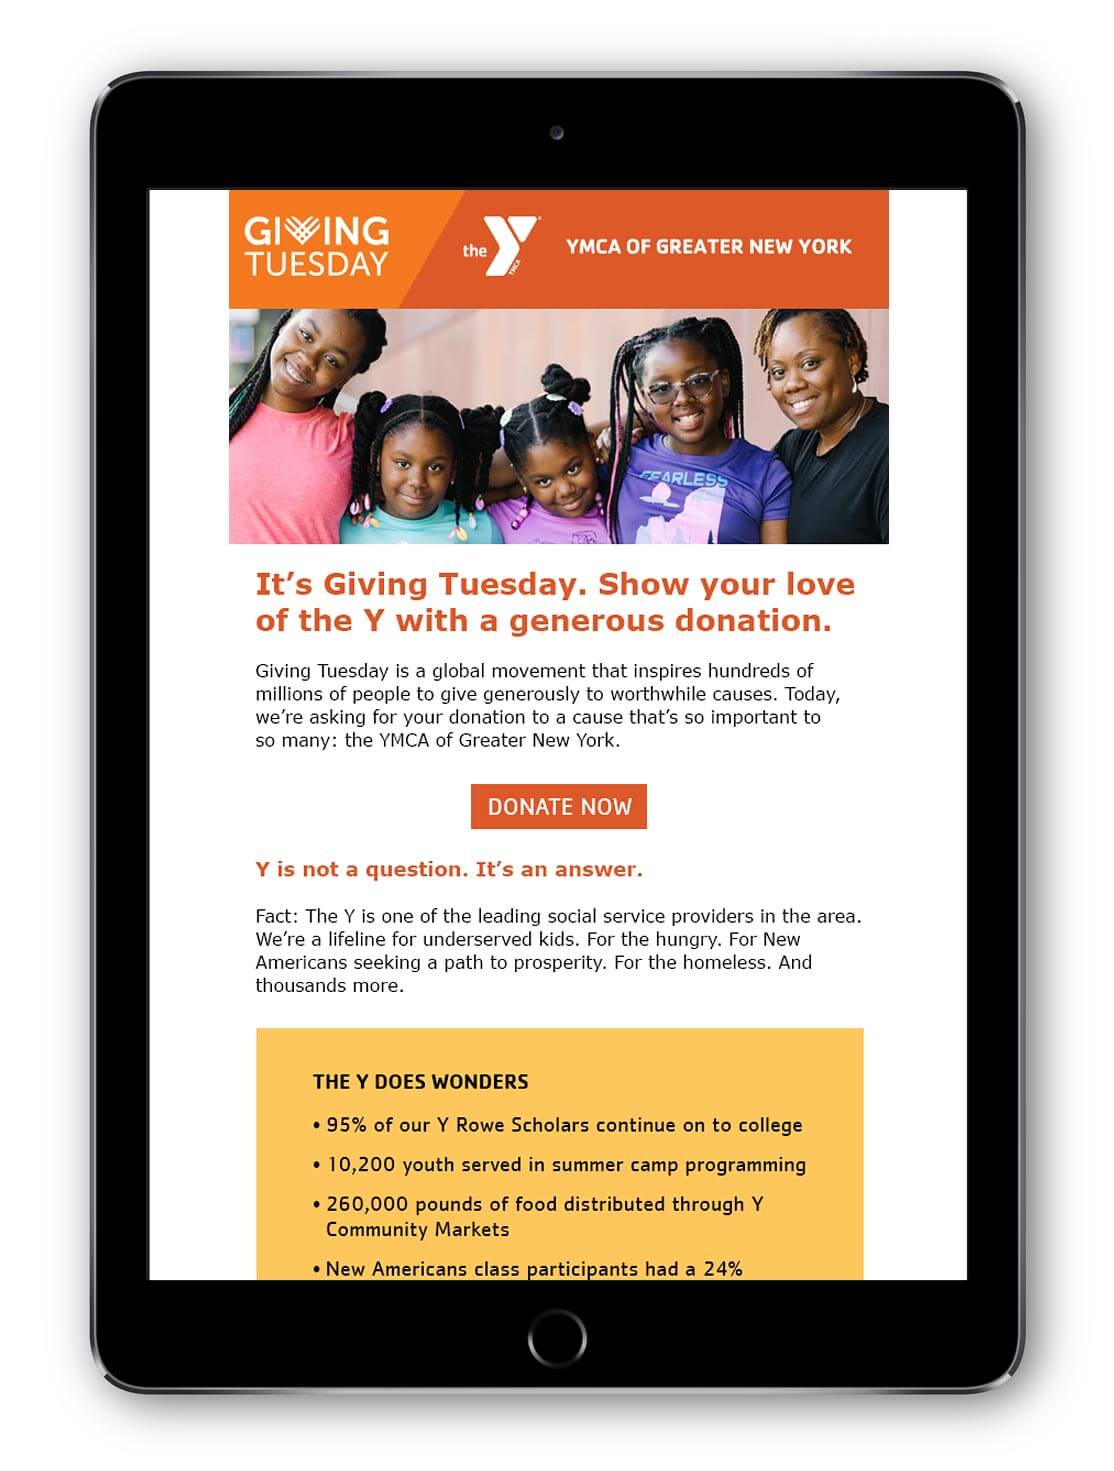 YMCA. It's Giving Tuesday. Show your love.